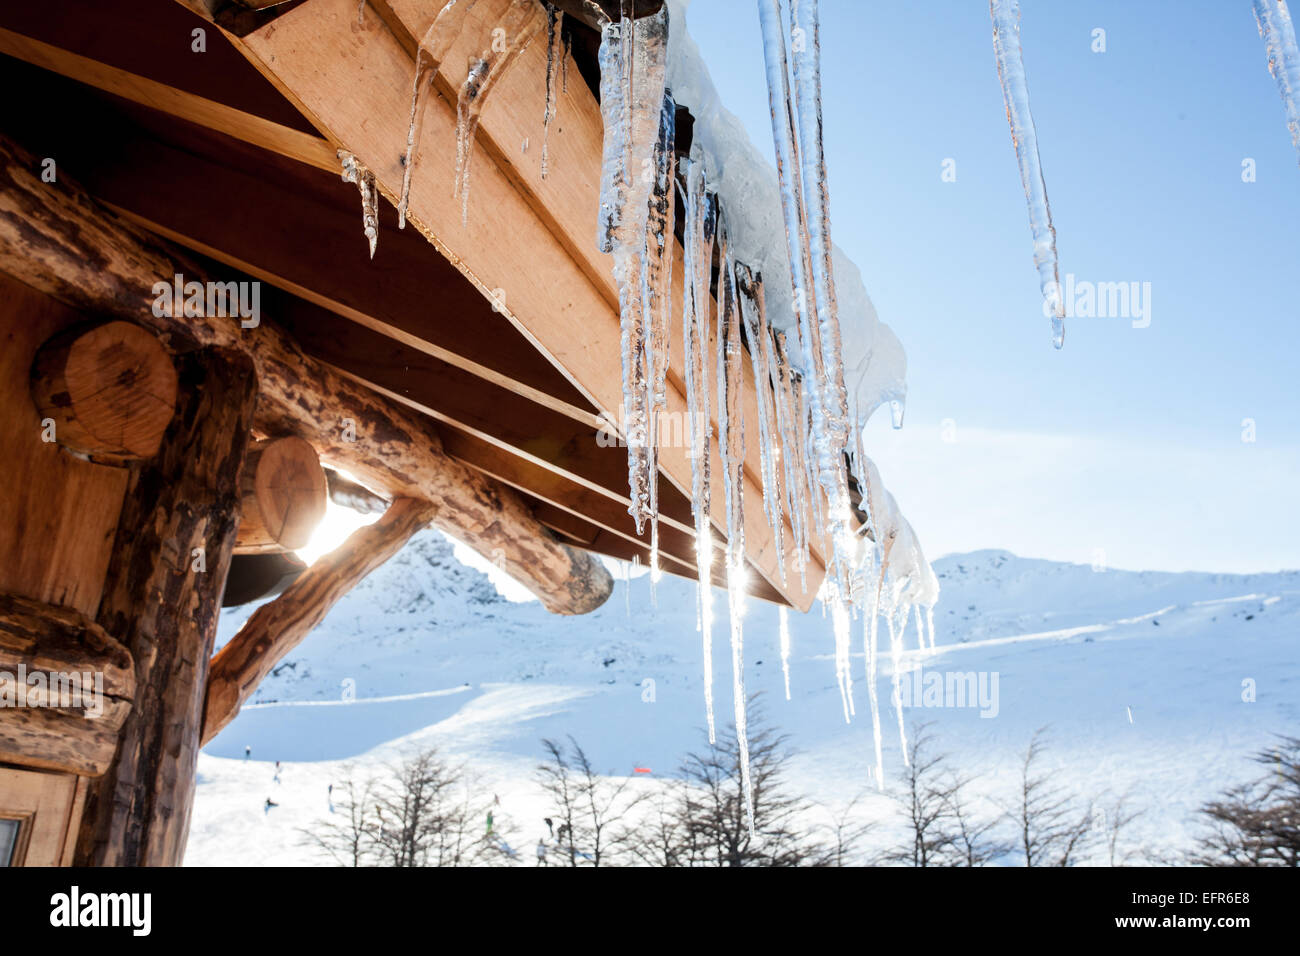 Icicles on cabin roof, Ushuaia, Tierra del Fuego, Argentina Stock Photo